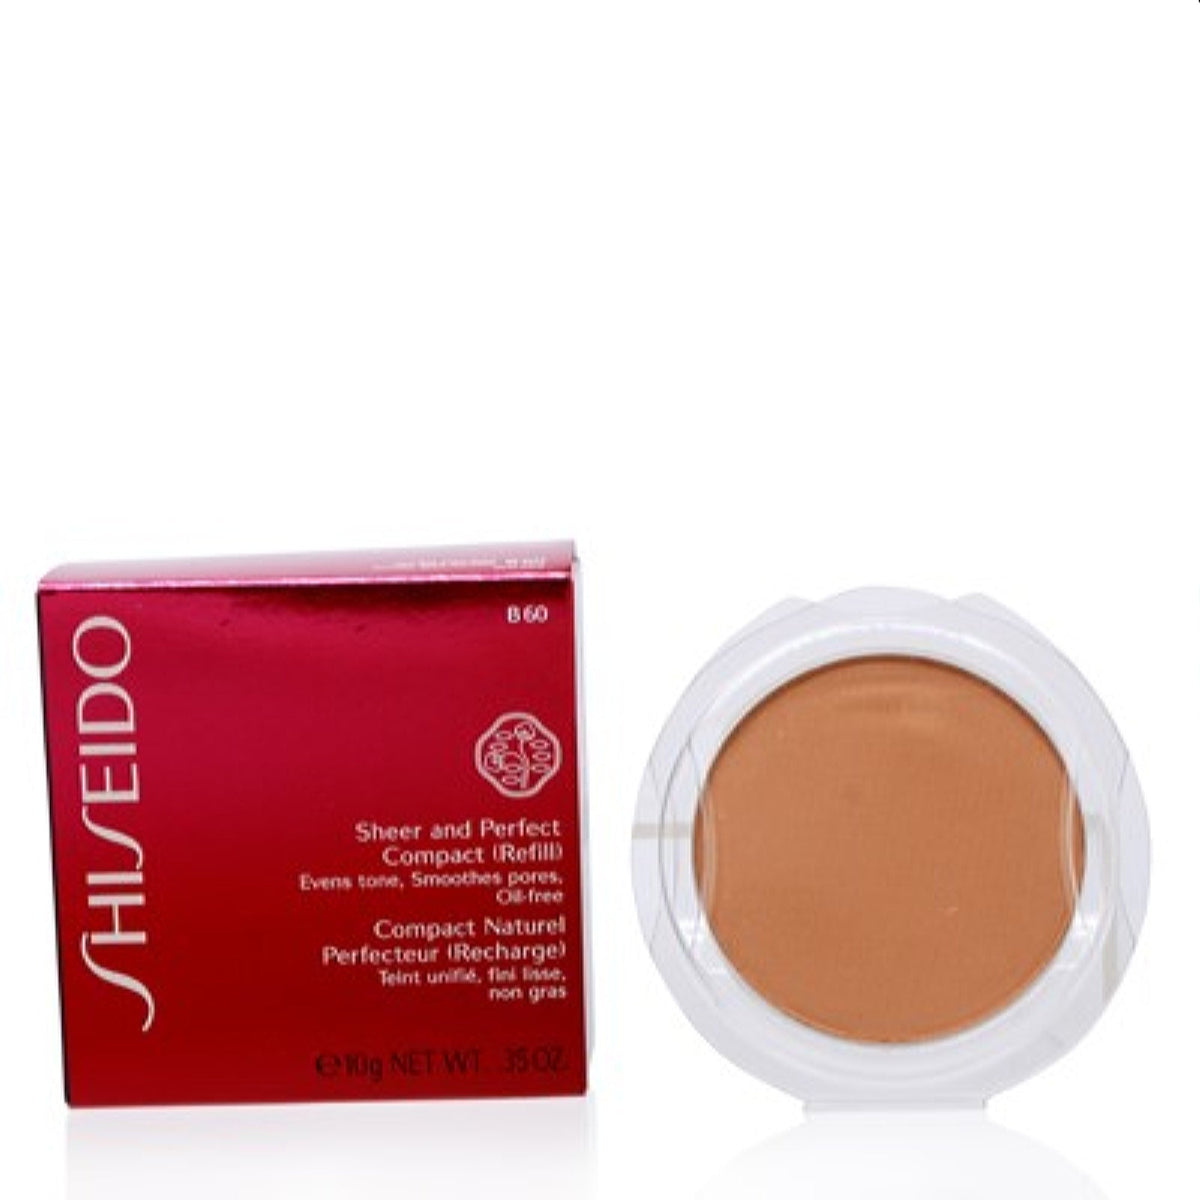 Shiseido Sheer And Perfect Compact Foundation Refill Natural Deep Beige (B60)  11315